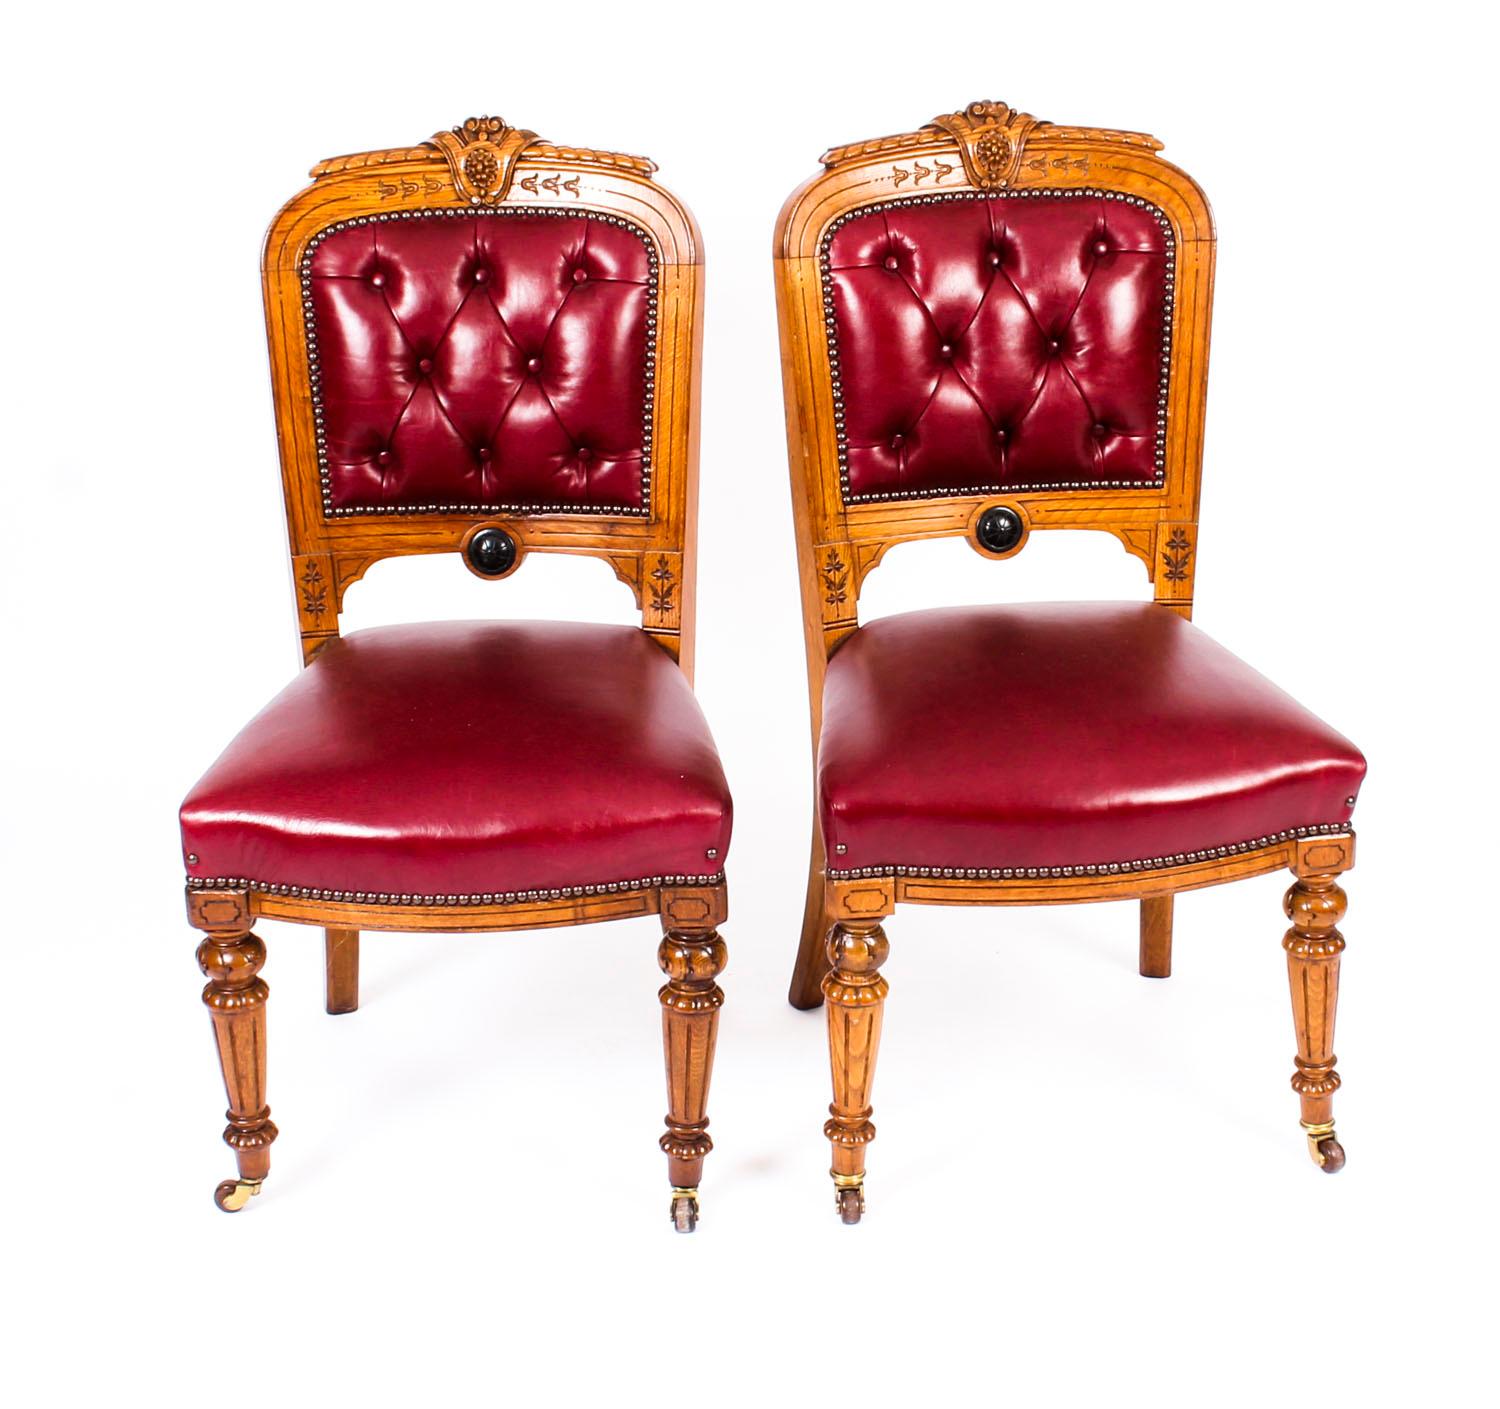 This is a fabulous antique English Victorian set of eight carved oak dining chairs with stunning burgundy leather upholstery circa 1860 in date.

The upholstered backs with beautiful hand carved foliate and anthemion decoration and buttoned back